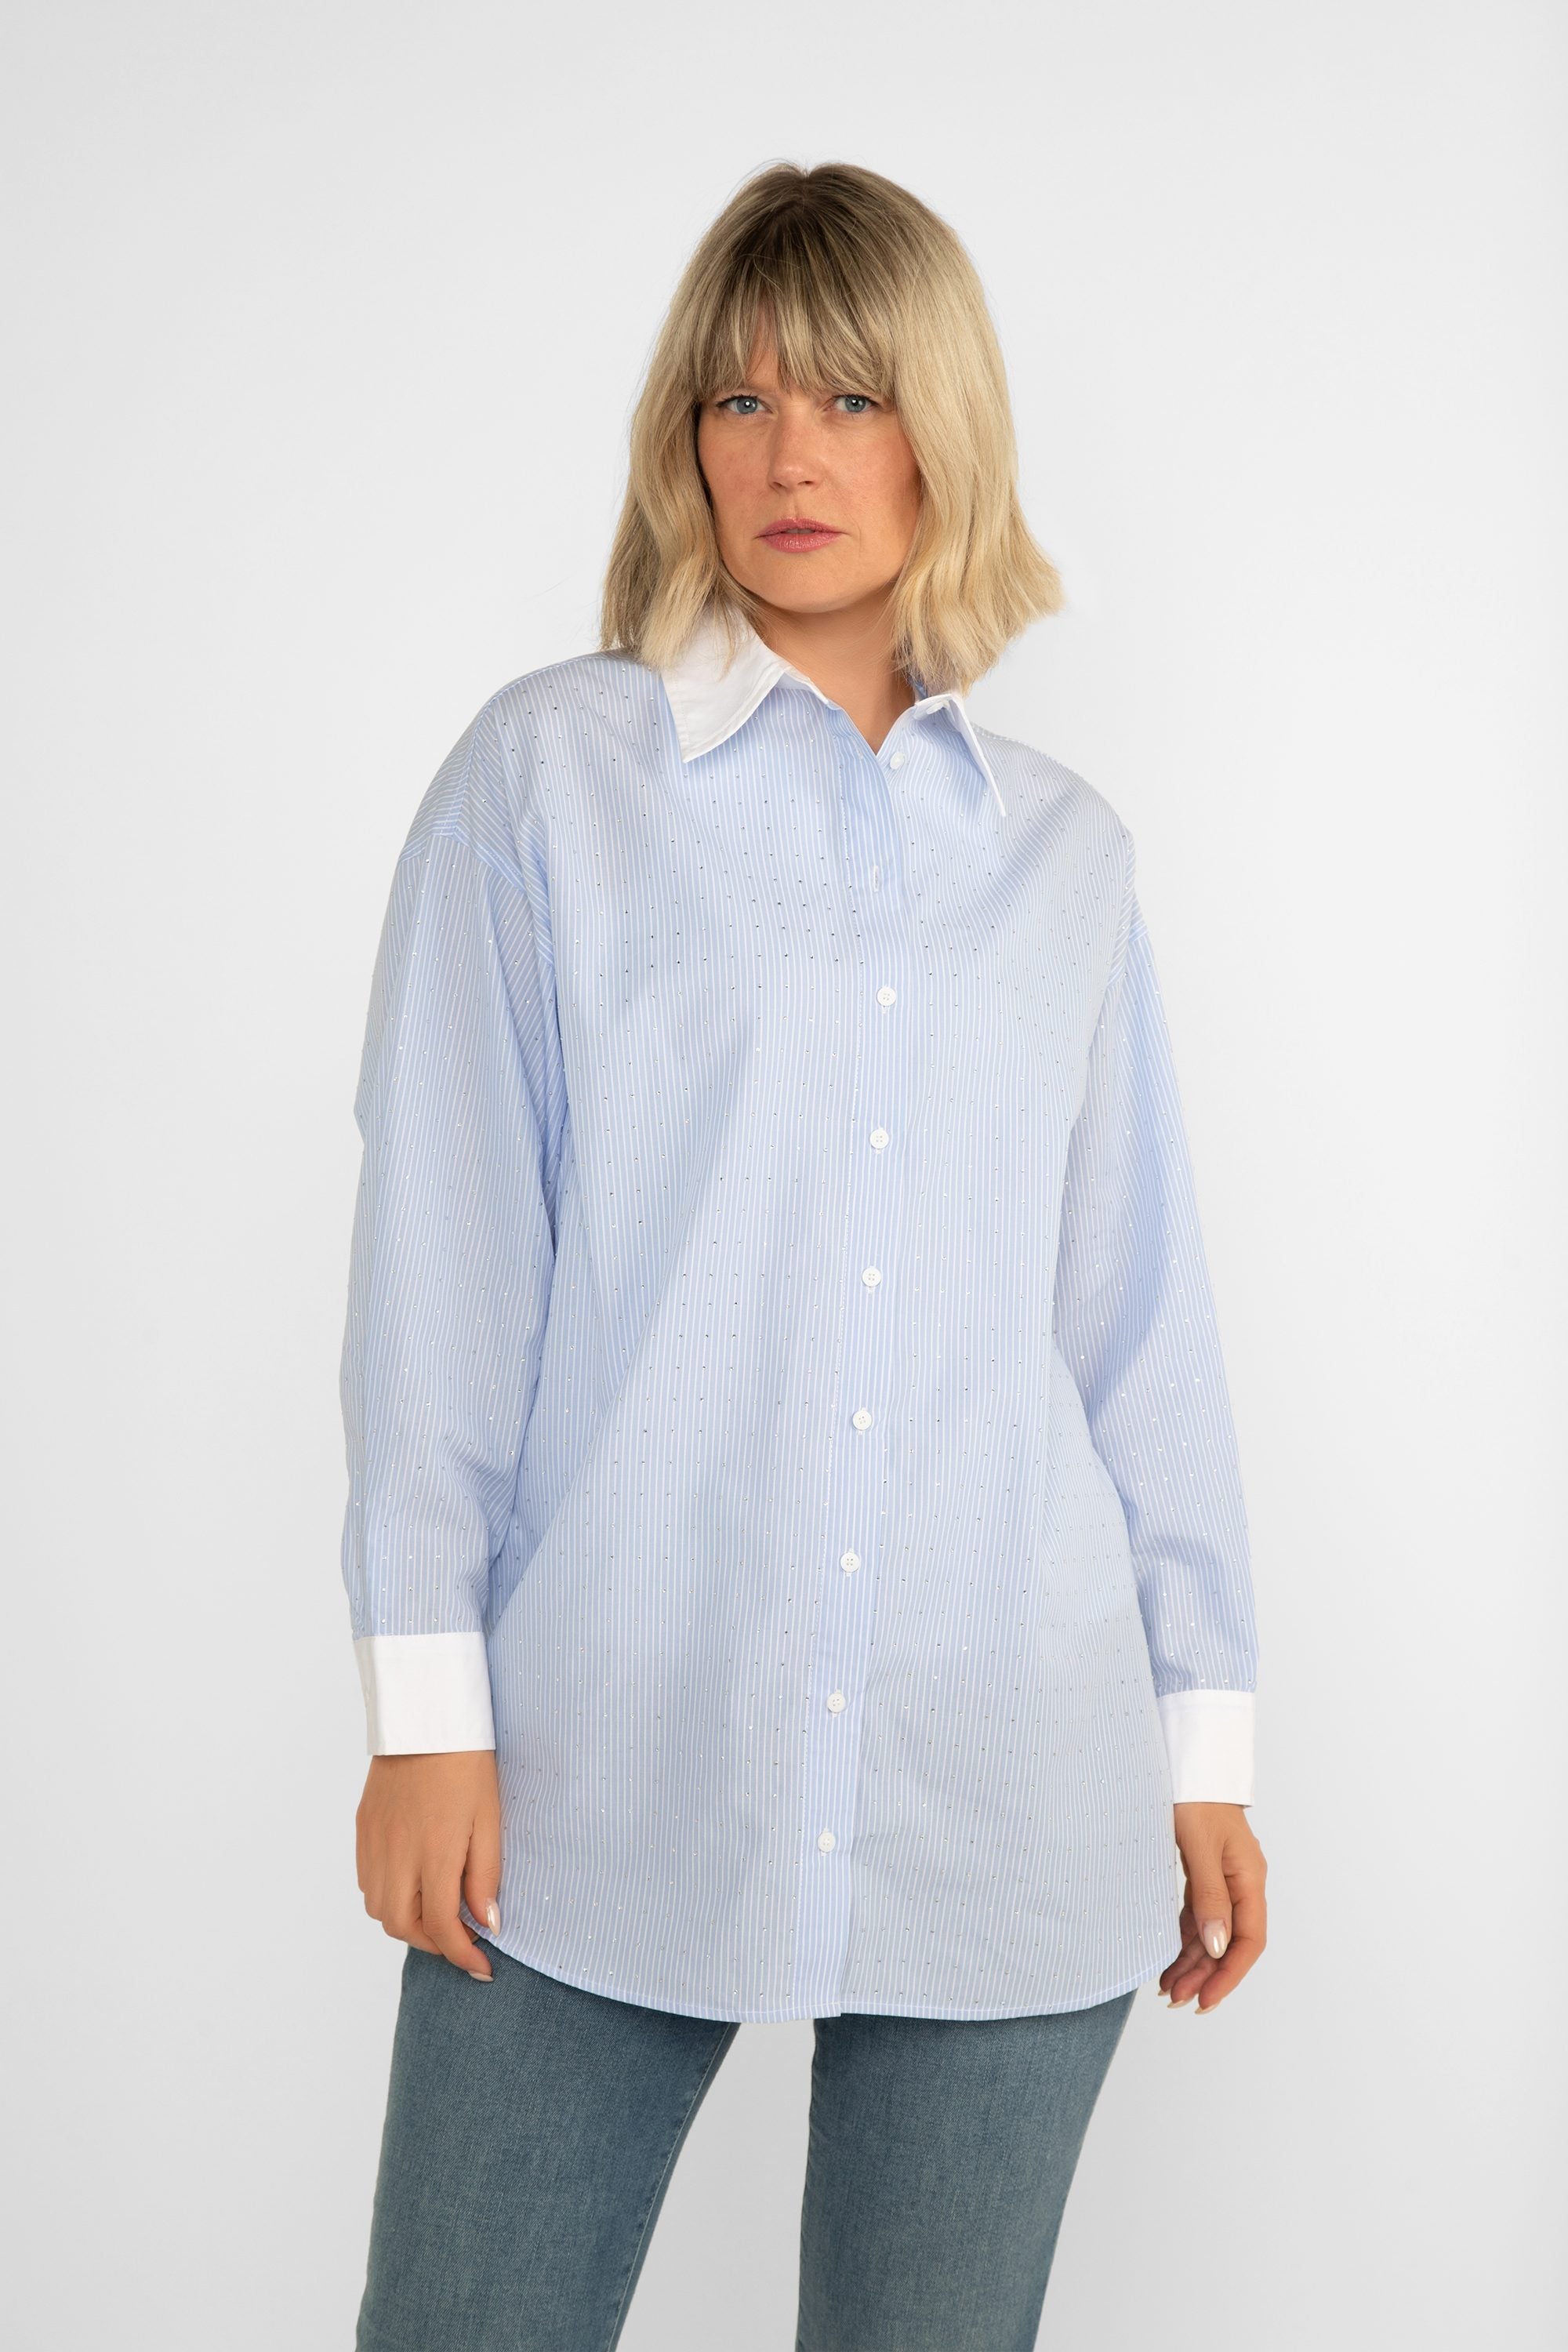 Lucy Paris (T2350) Women's Long Sleeve Button Up Blouse with Shirt Collar and All Over Rhinestone Embellishment in Blue & White Vertical Stripes